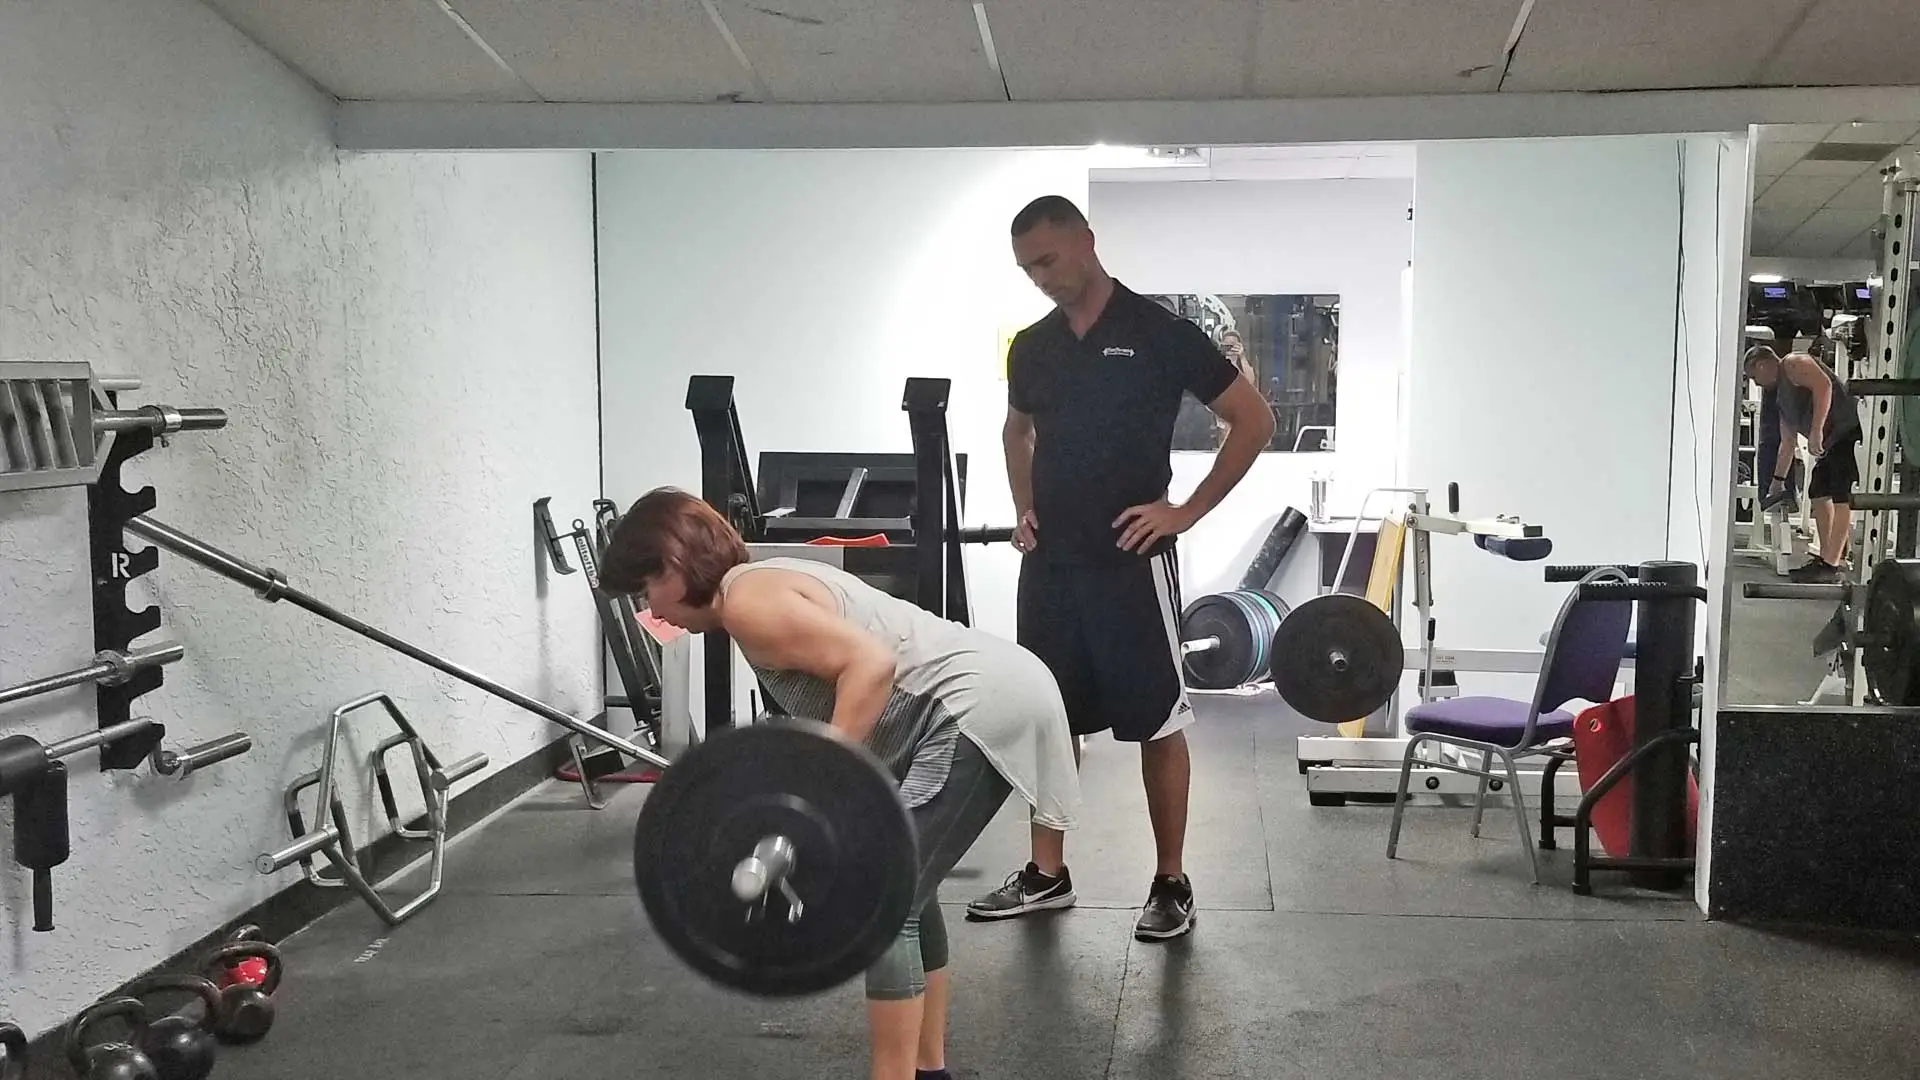 Personal training instruction on how to do a barbell row in Apollo Beach.